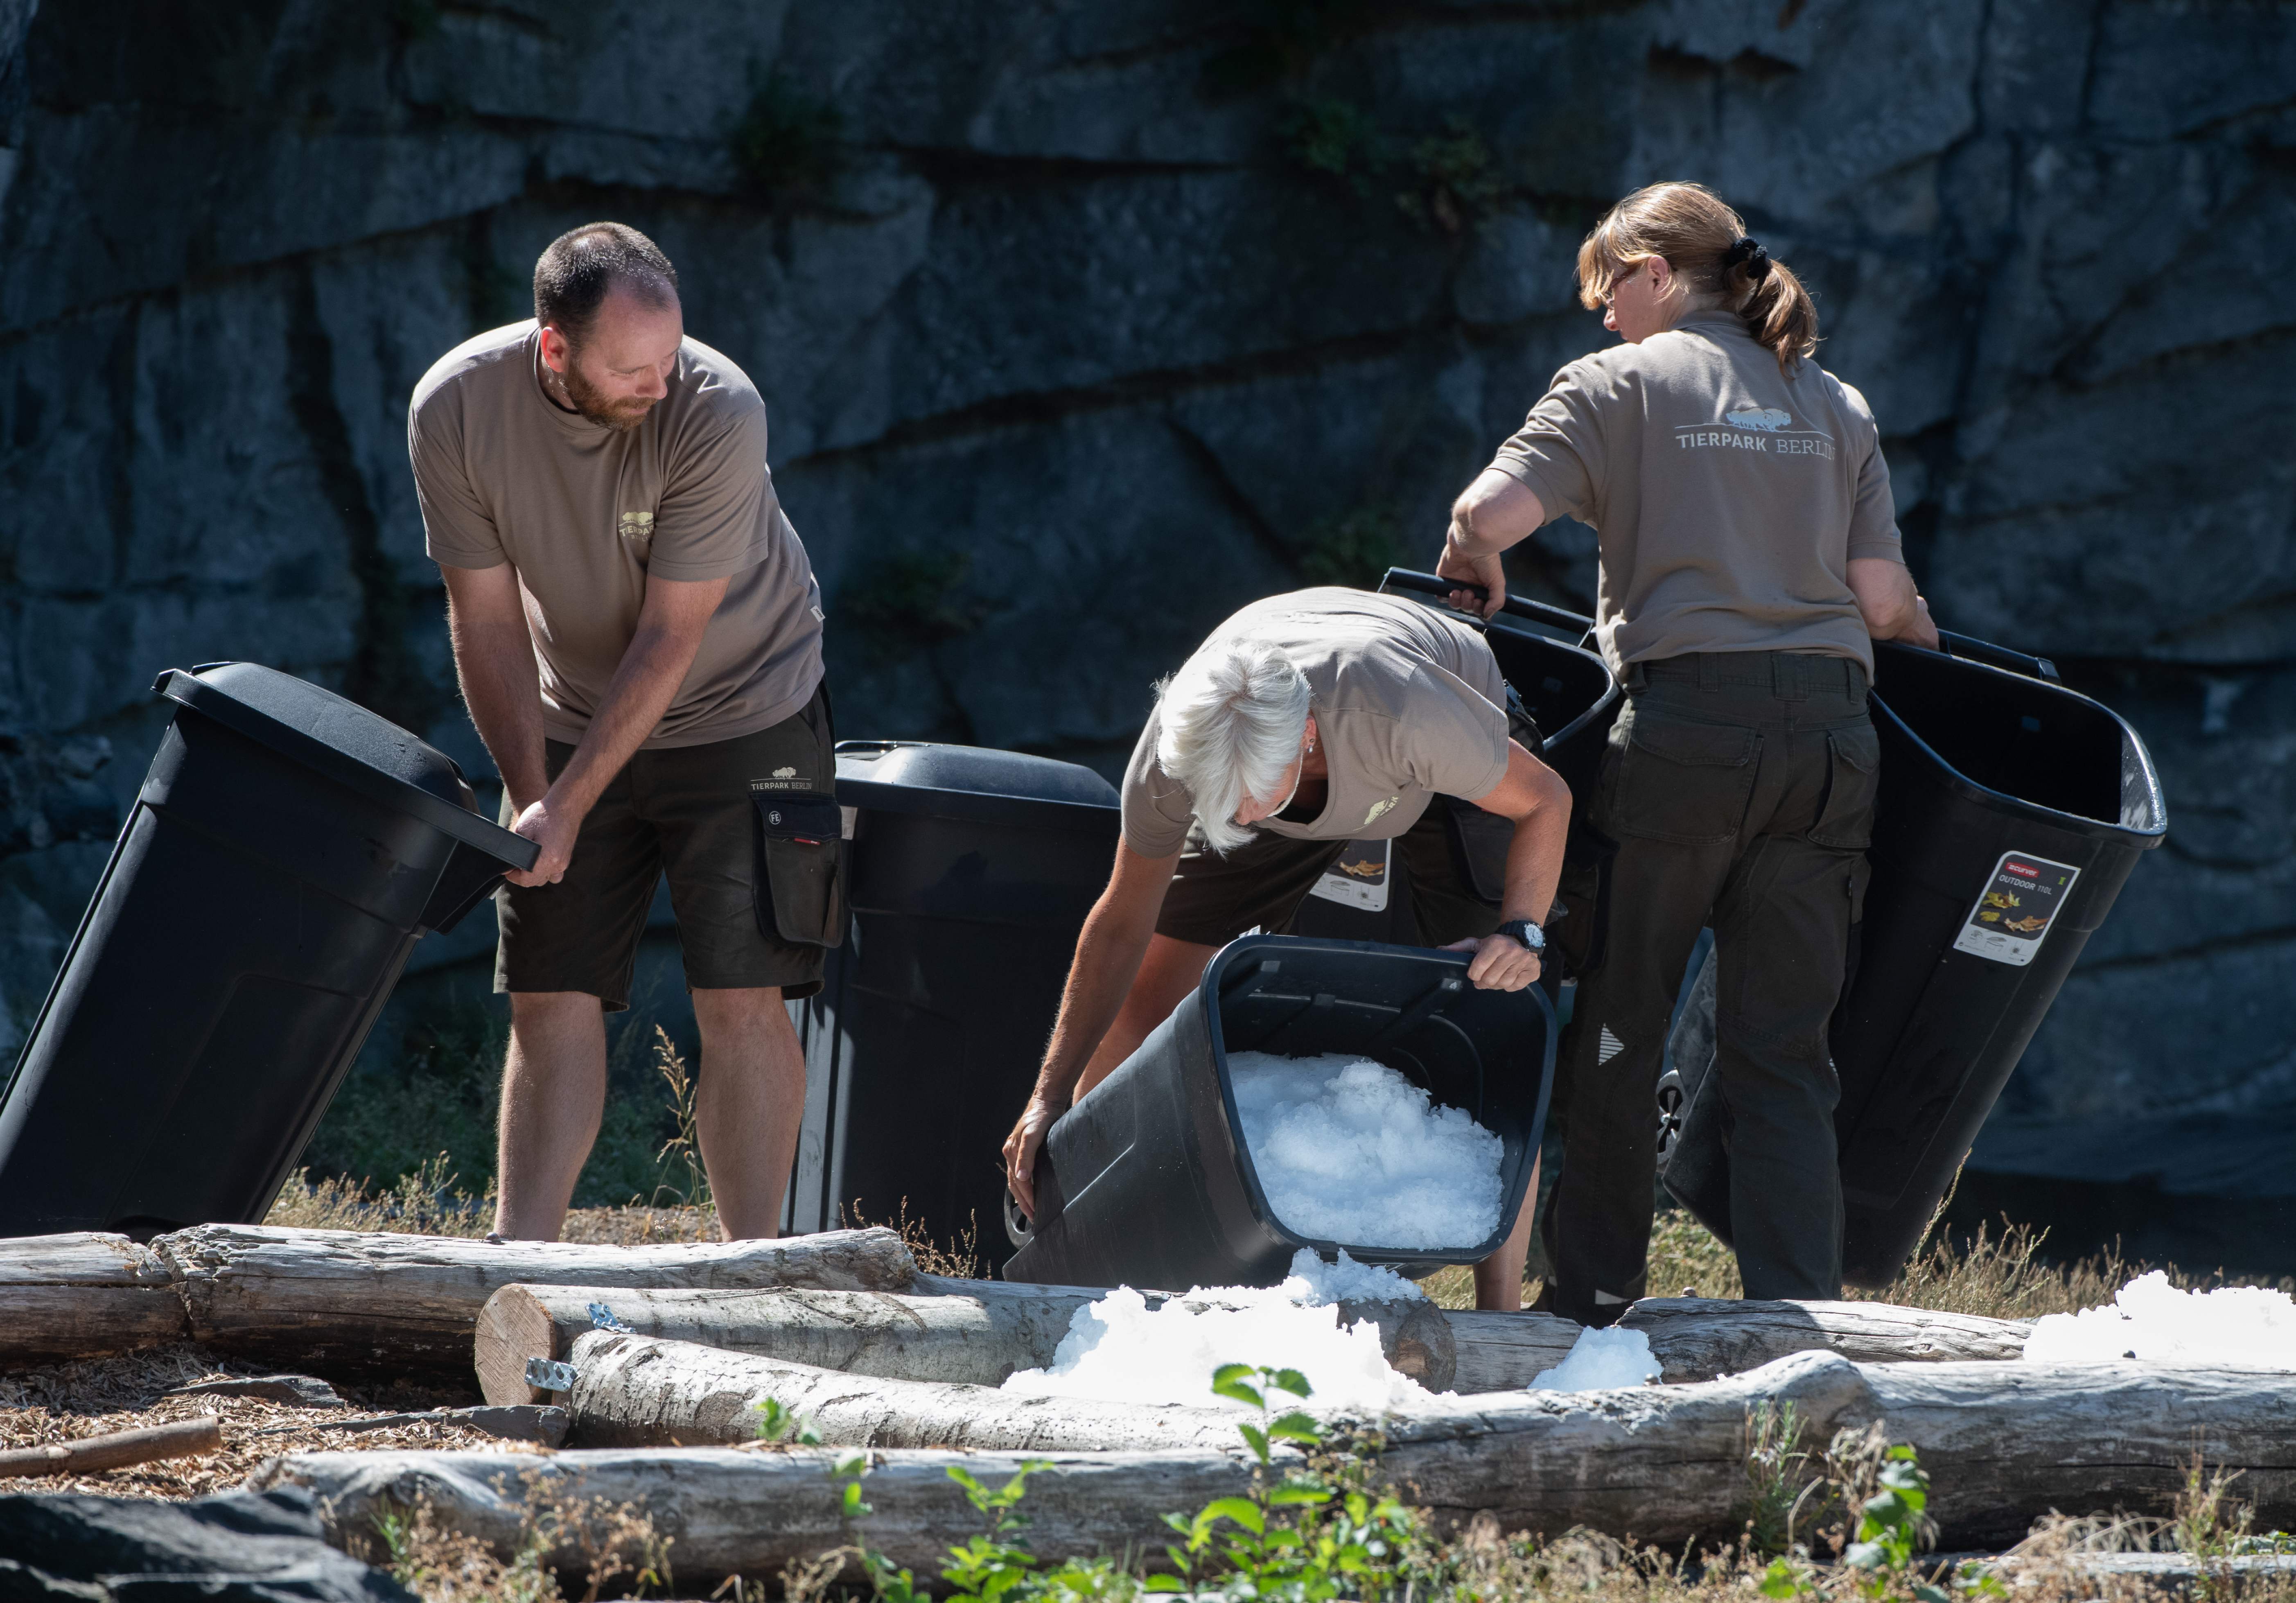 Zookeepers prepare an ice bath for ice bear Tonja at the zoo in Berlin, on August 7, 2018 as the heatwave in Europe continues. / AFP PHOTO / dpa / Paul Zinken / Germany OUT